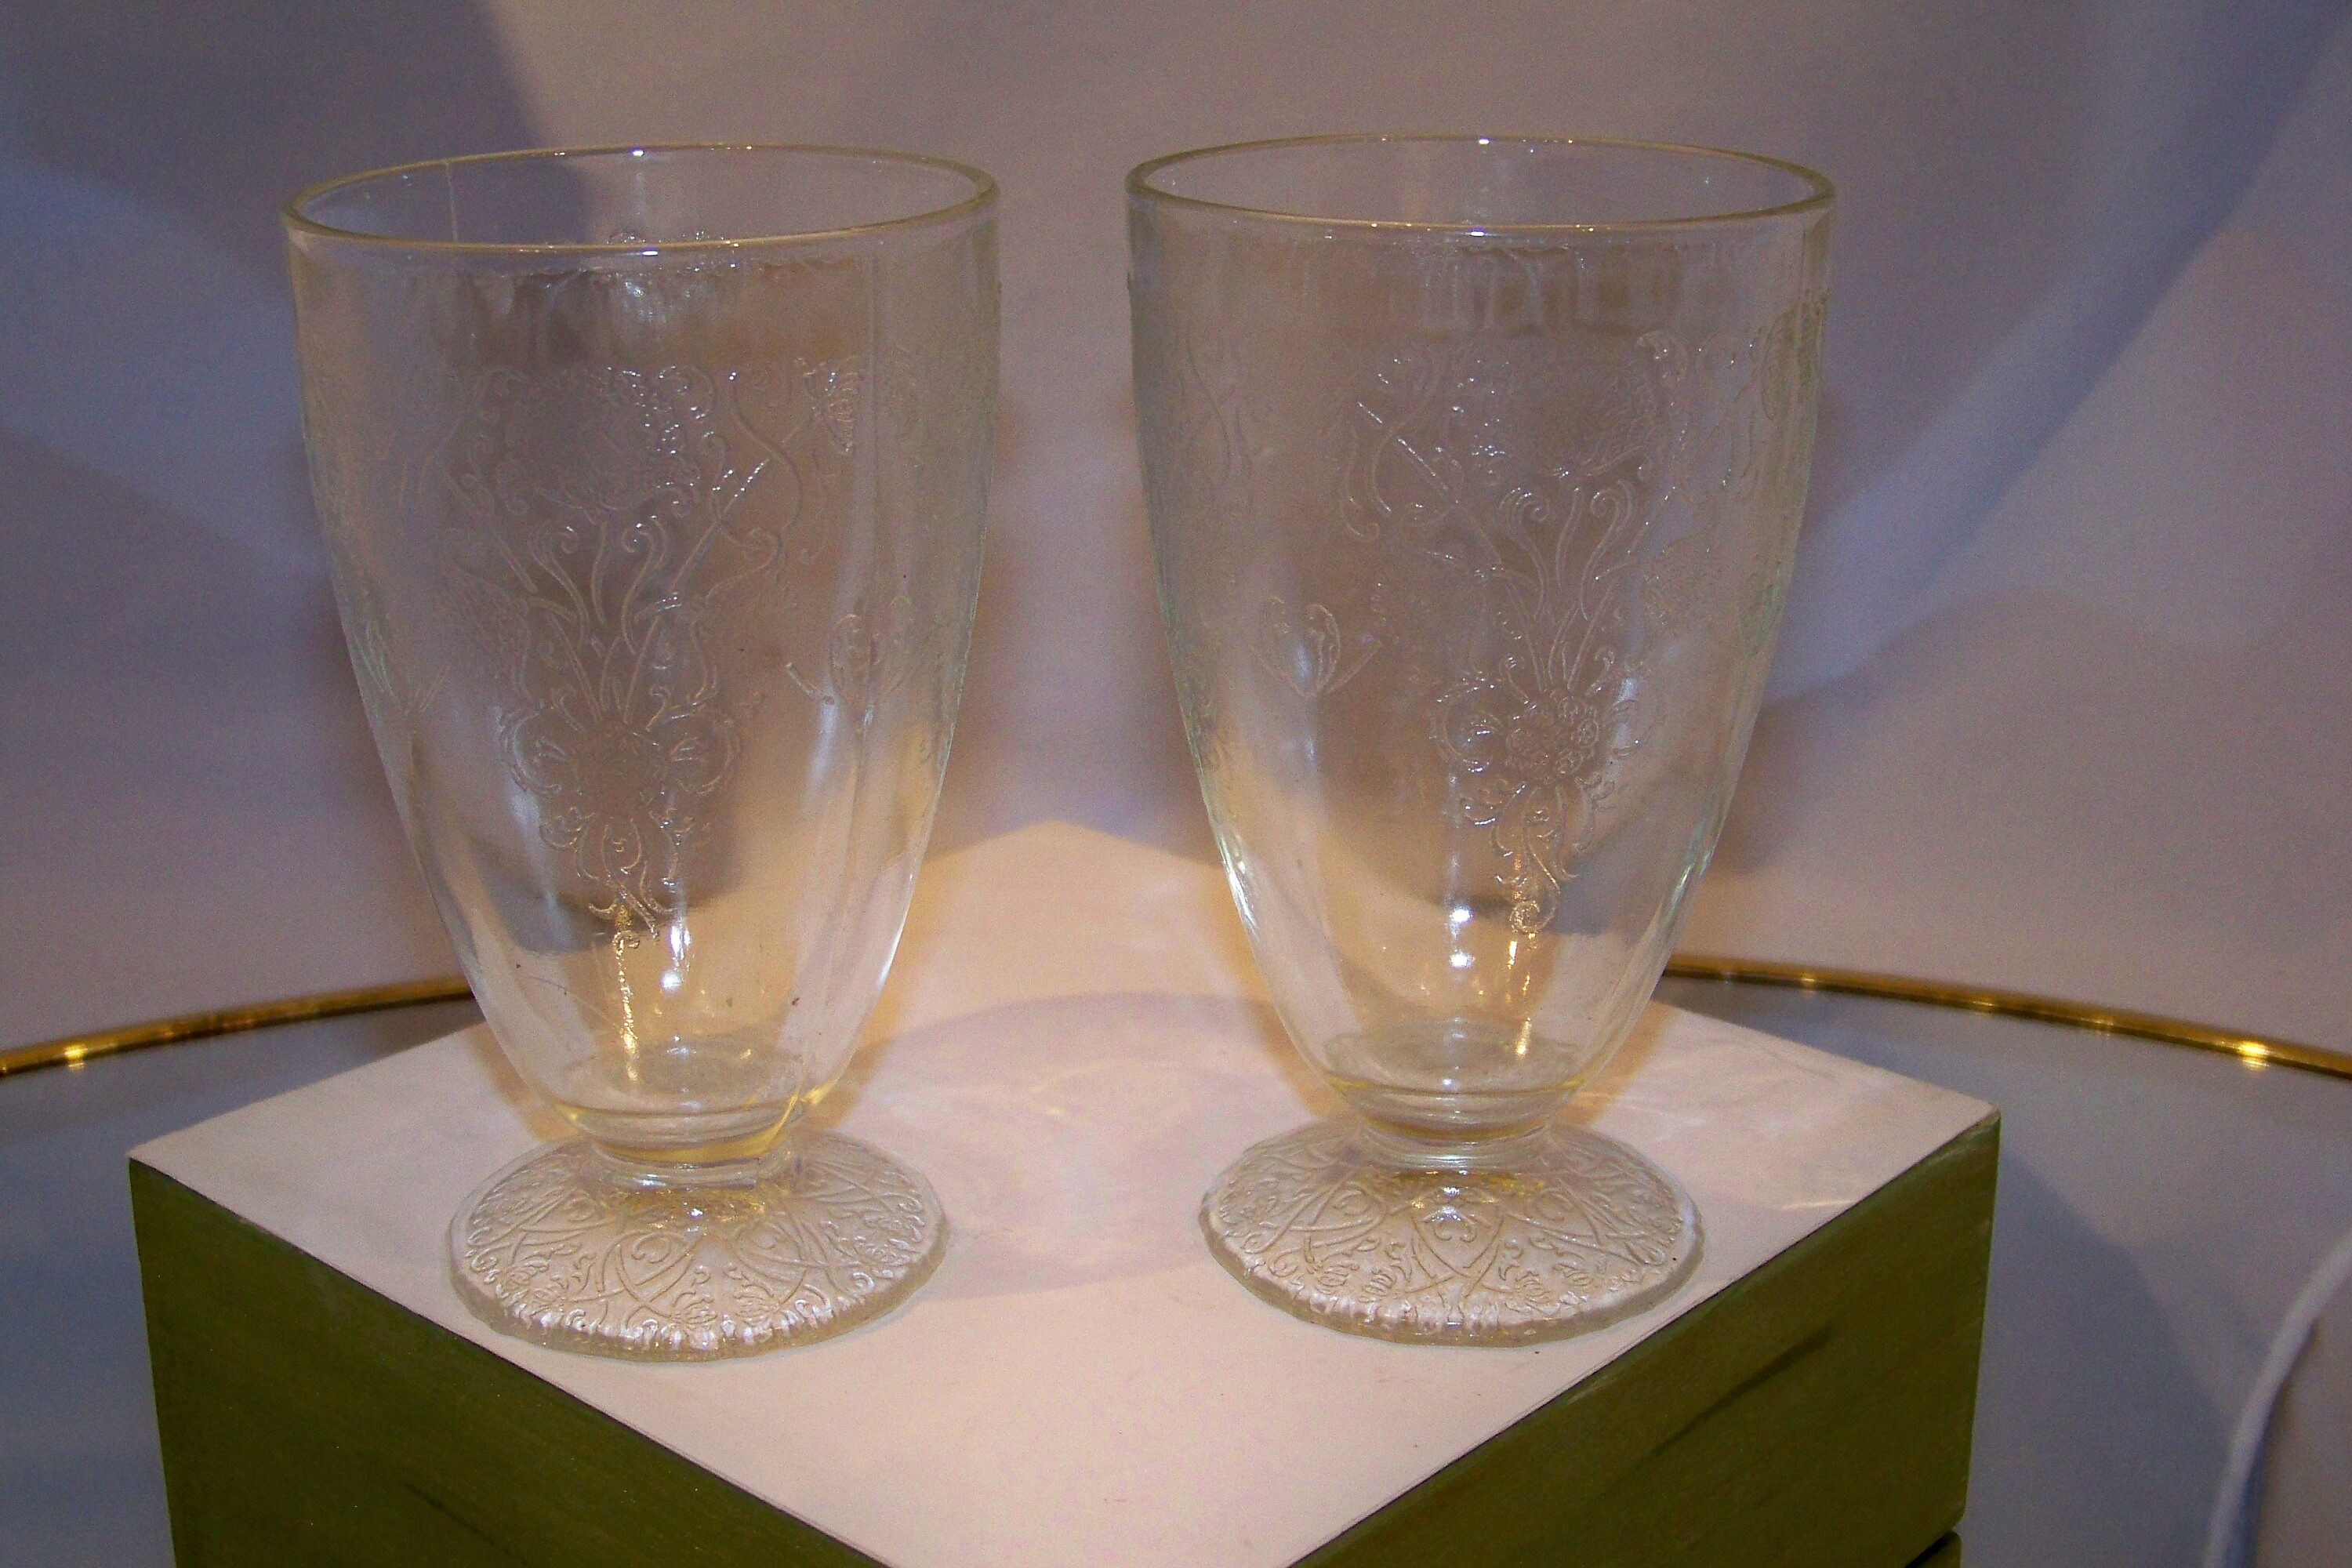 SET OF 6 Tall Drinking Glasses w/Poppy Floral Art Made in Russia, 8 fl oz  each